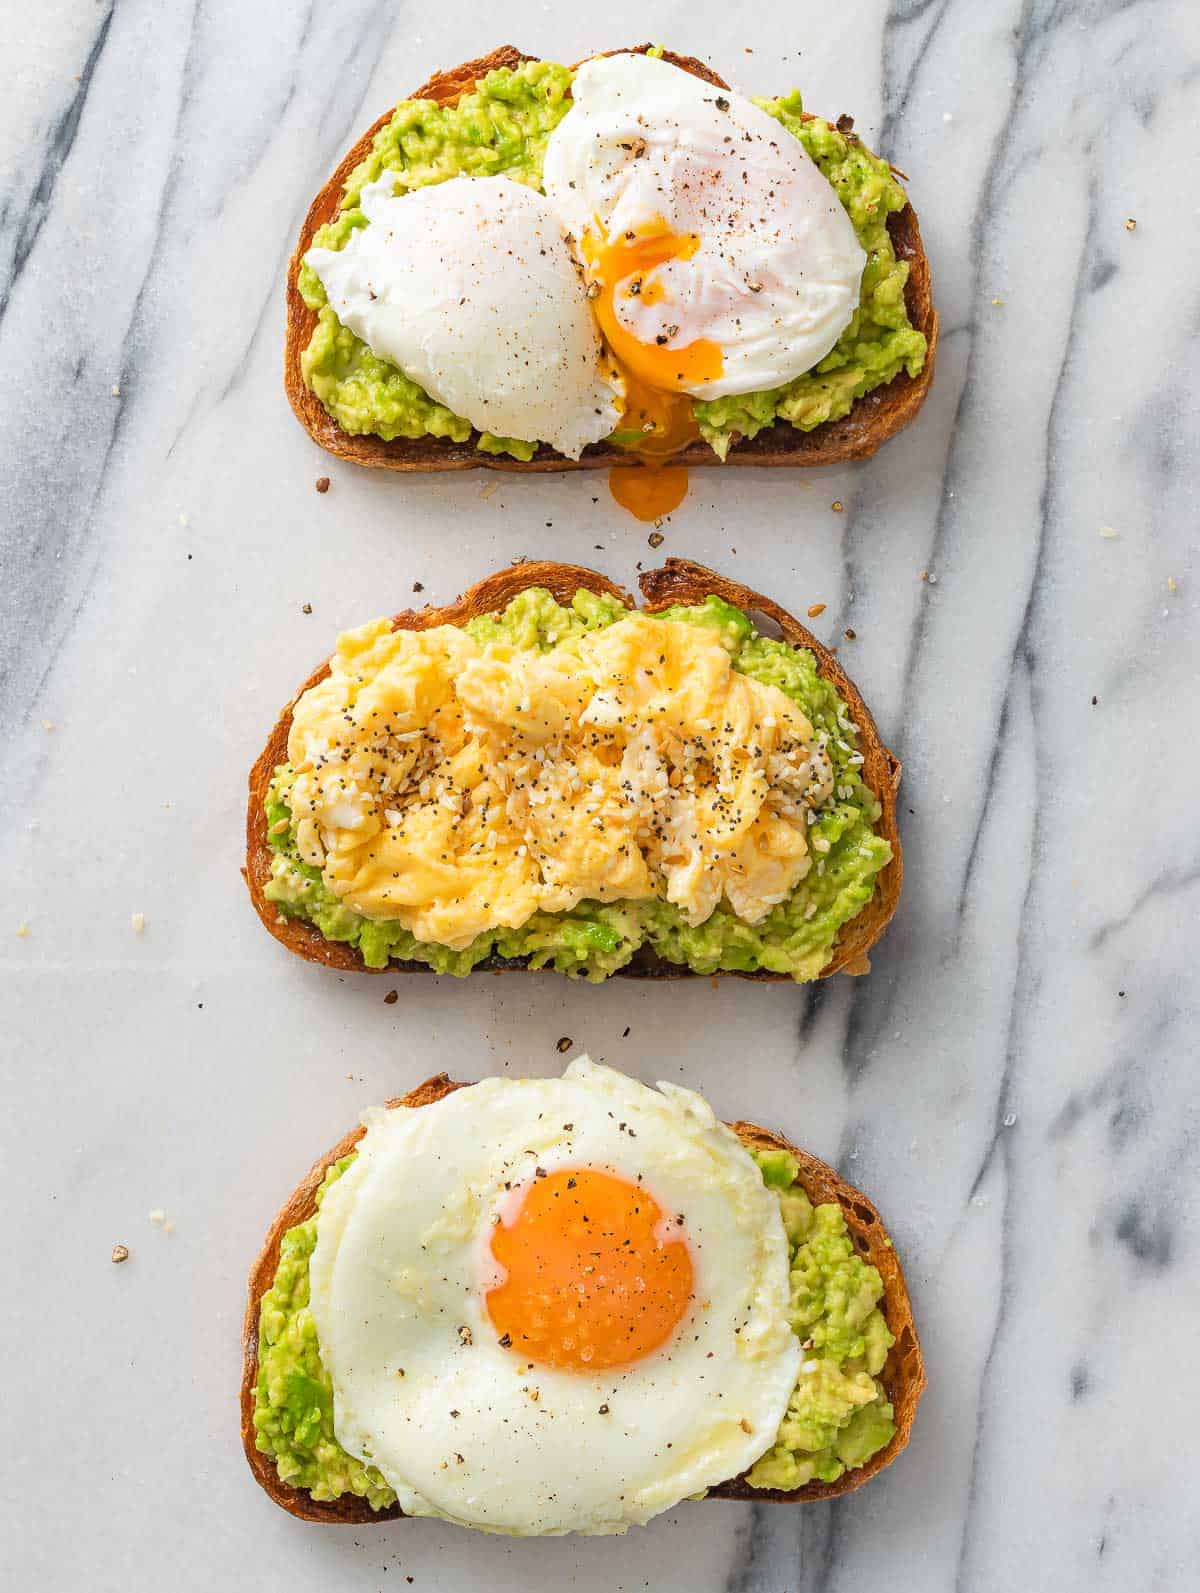 Make This Ultimate Mashed Avocado Toast 3 Different Ways!